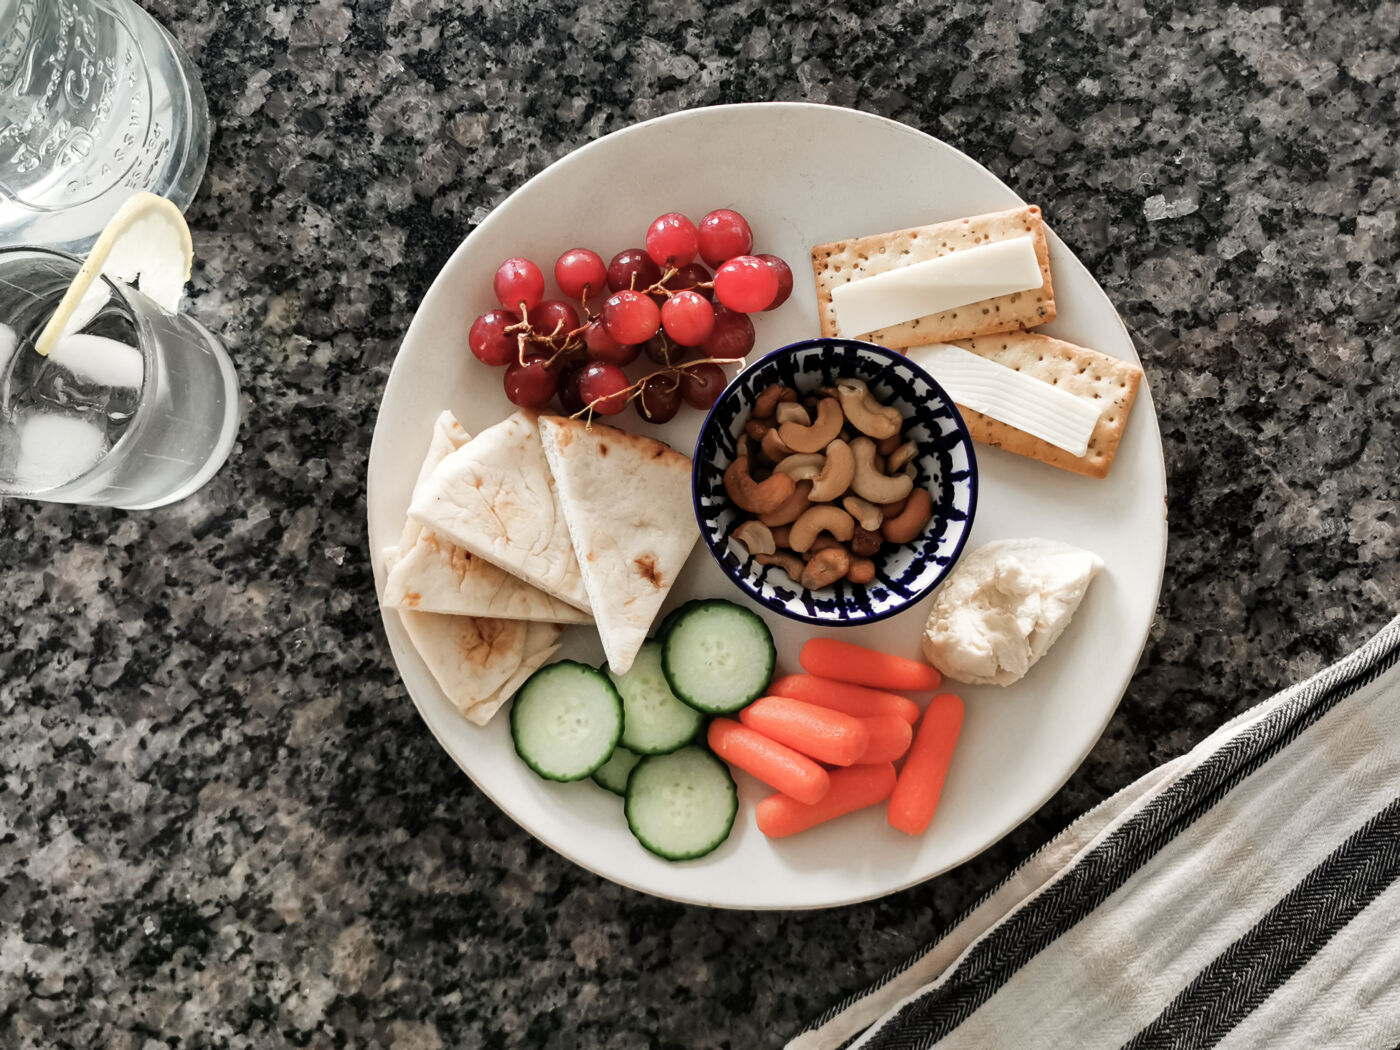 grazing lunch plate with vegetables, hummus, grapes, cheese and crackers